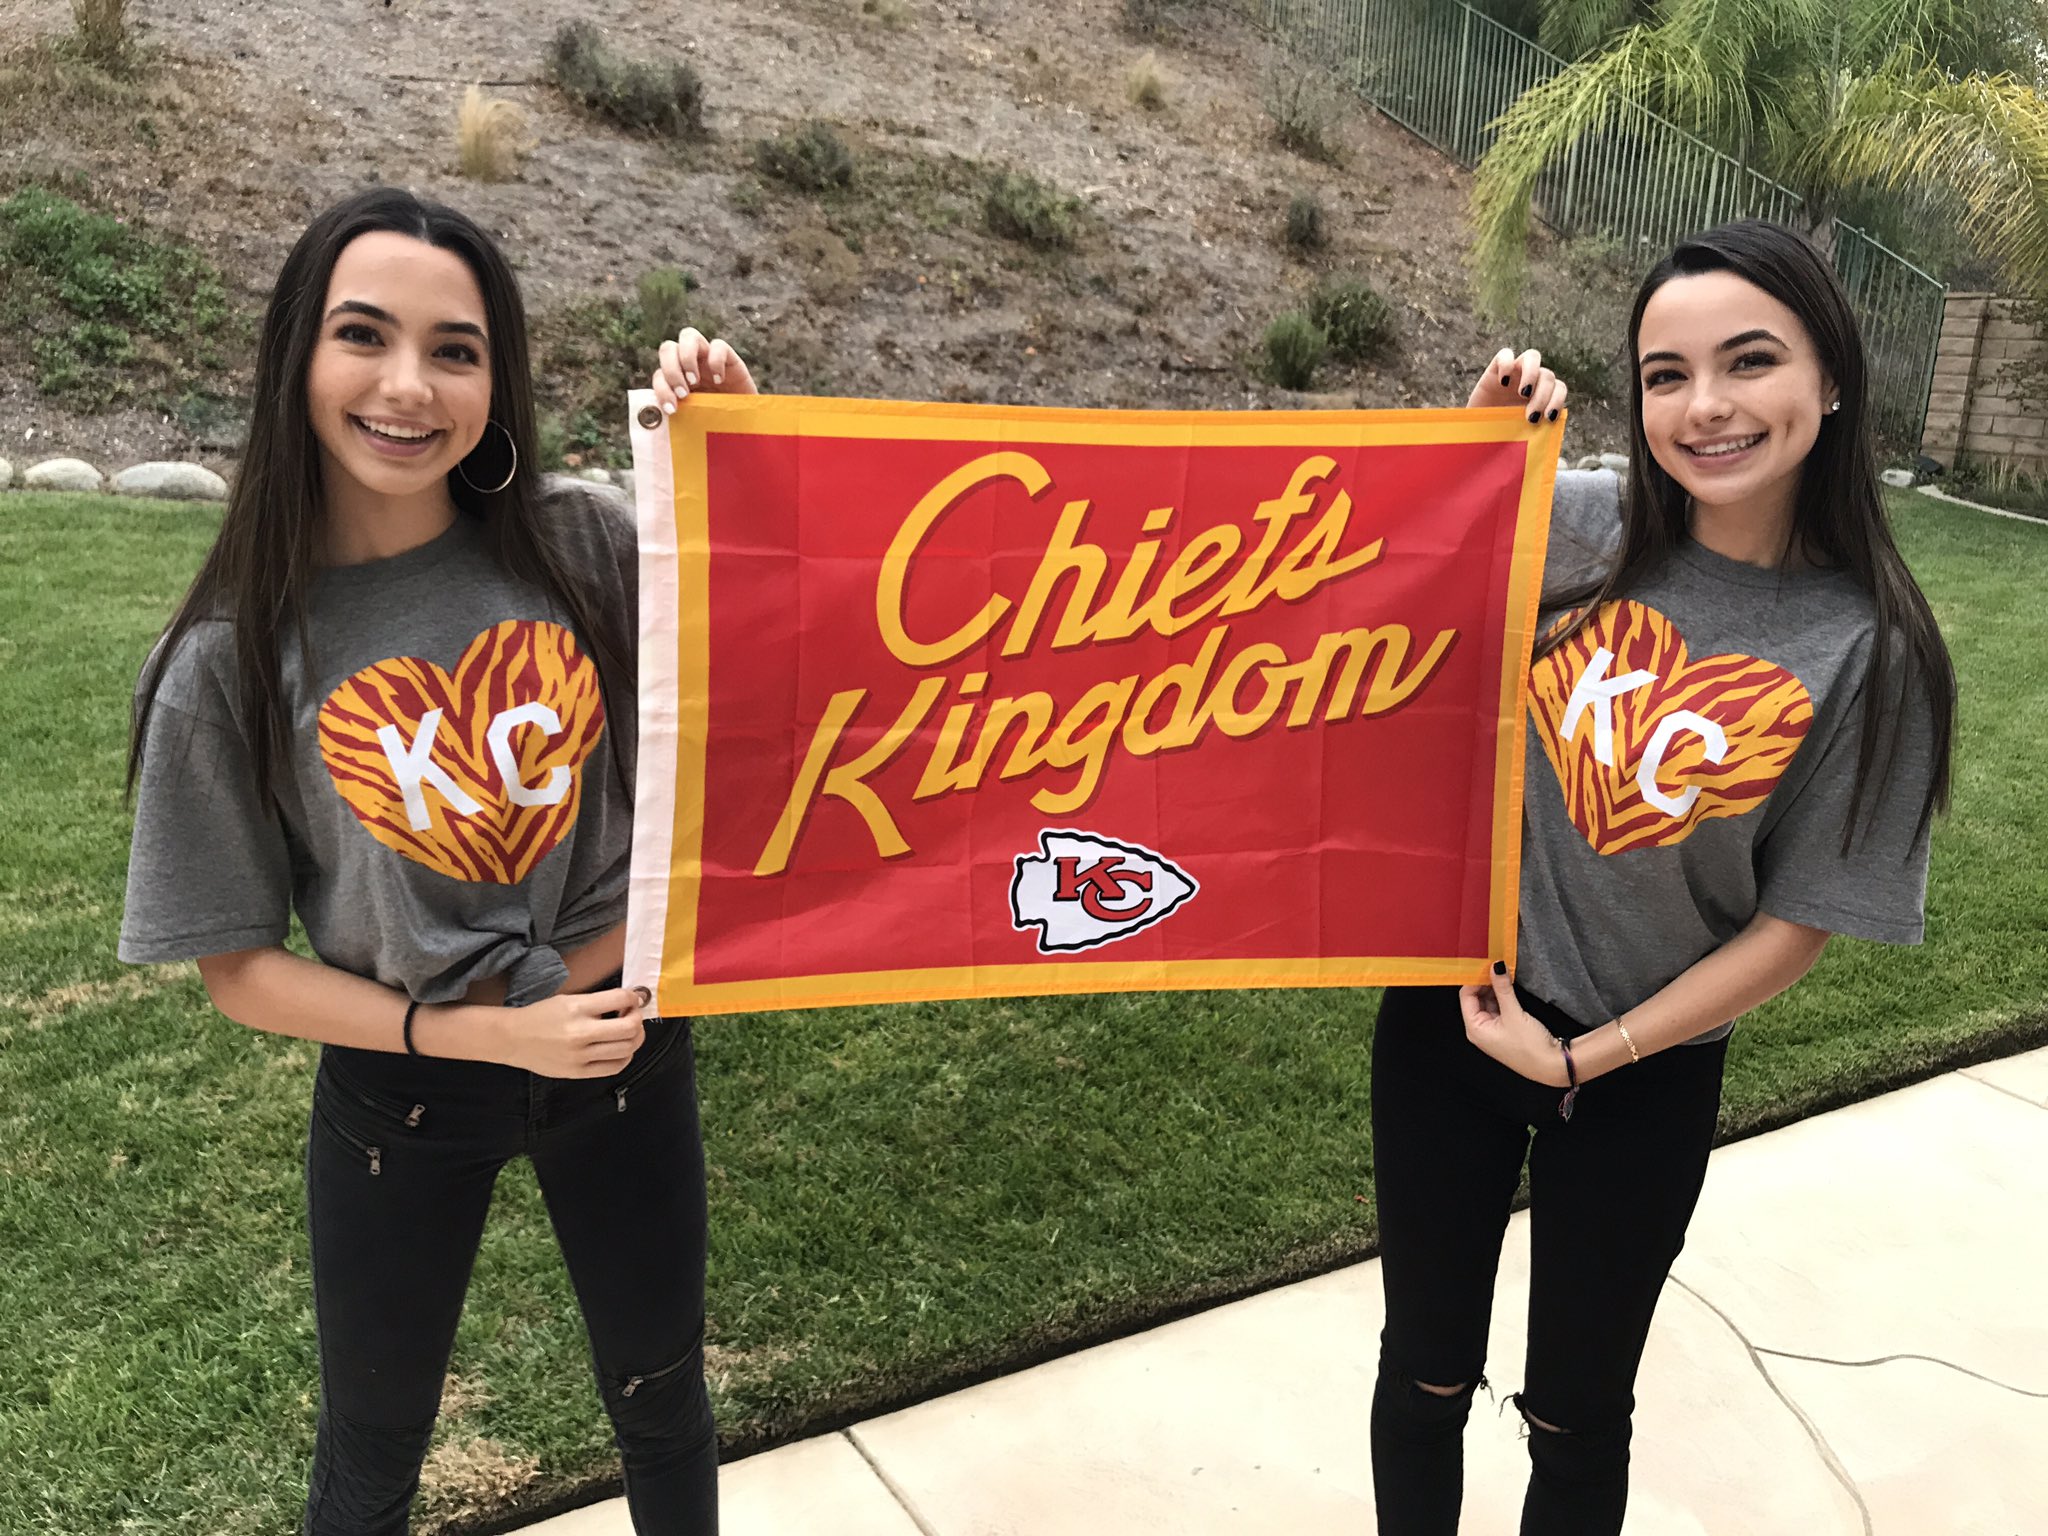 Merrell Twins on Twitter: "Supporting the @Chiefs #RedFriday proceeds of the commemorative flag go to the Ronald McDonald House Charities of KC! #chiefskingdom 🏈 https://t.co/Dur0jNdWqI" / Twitter